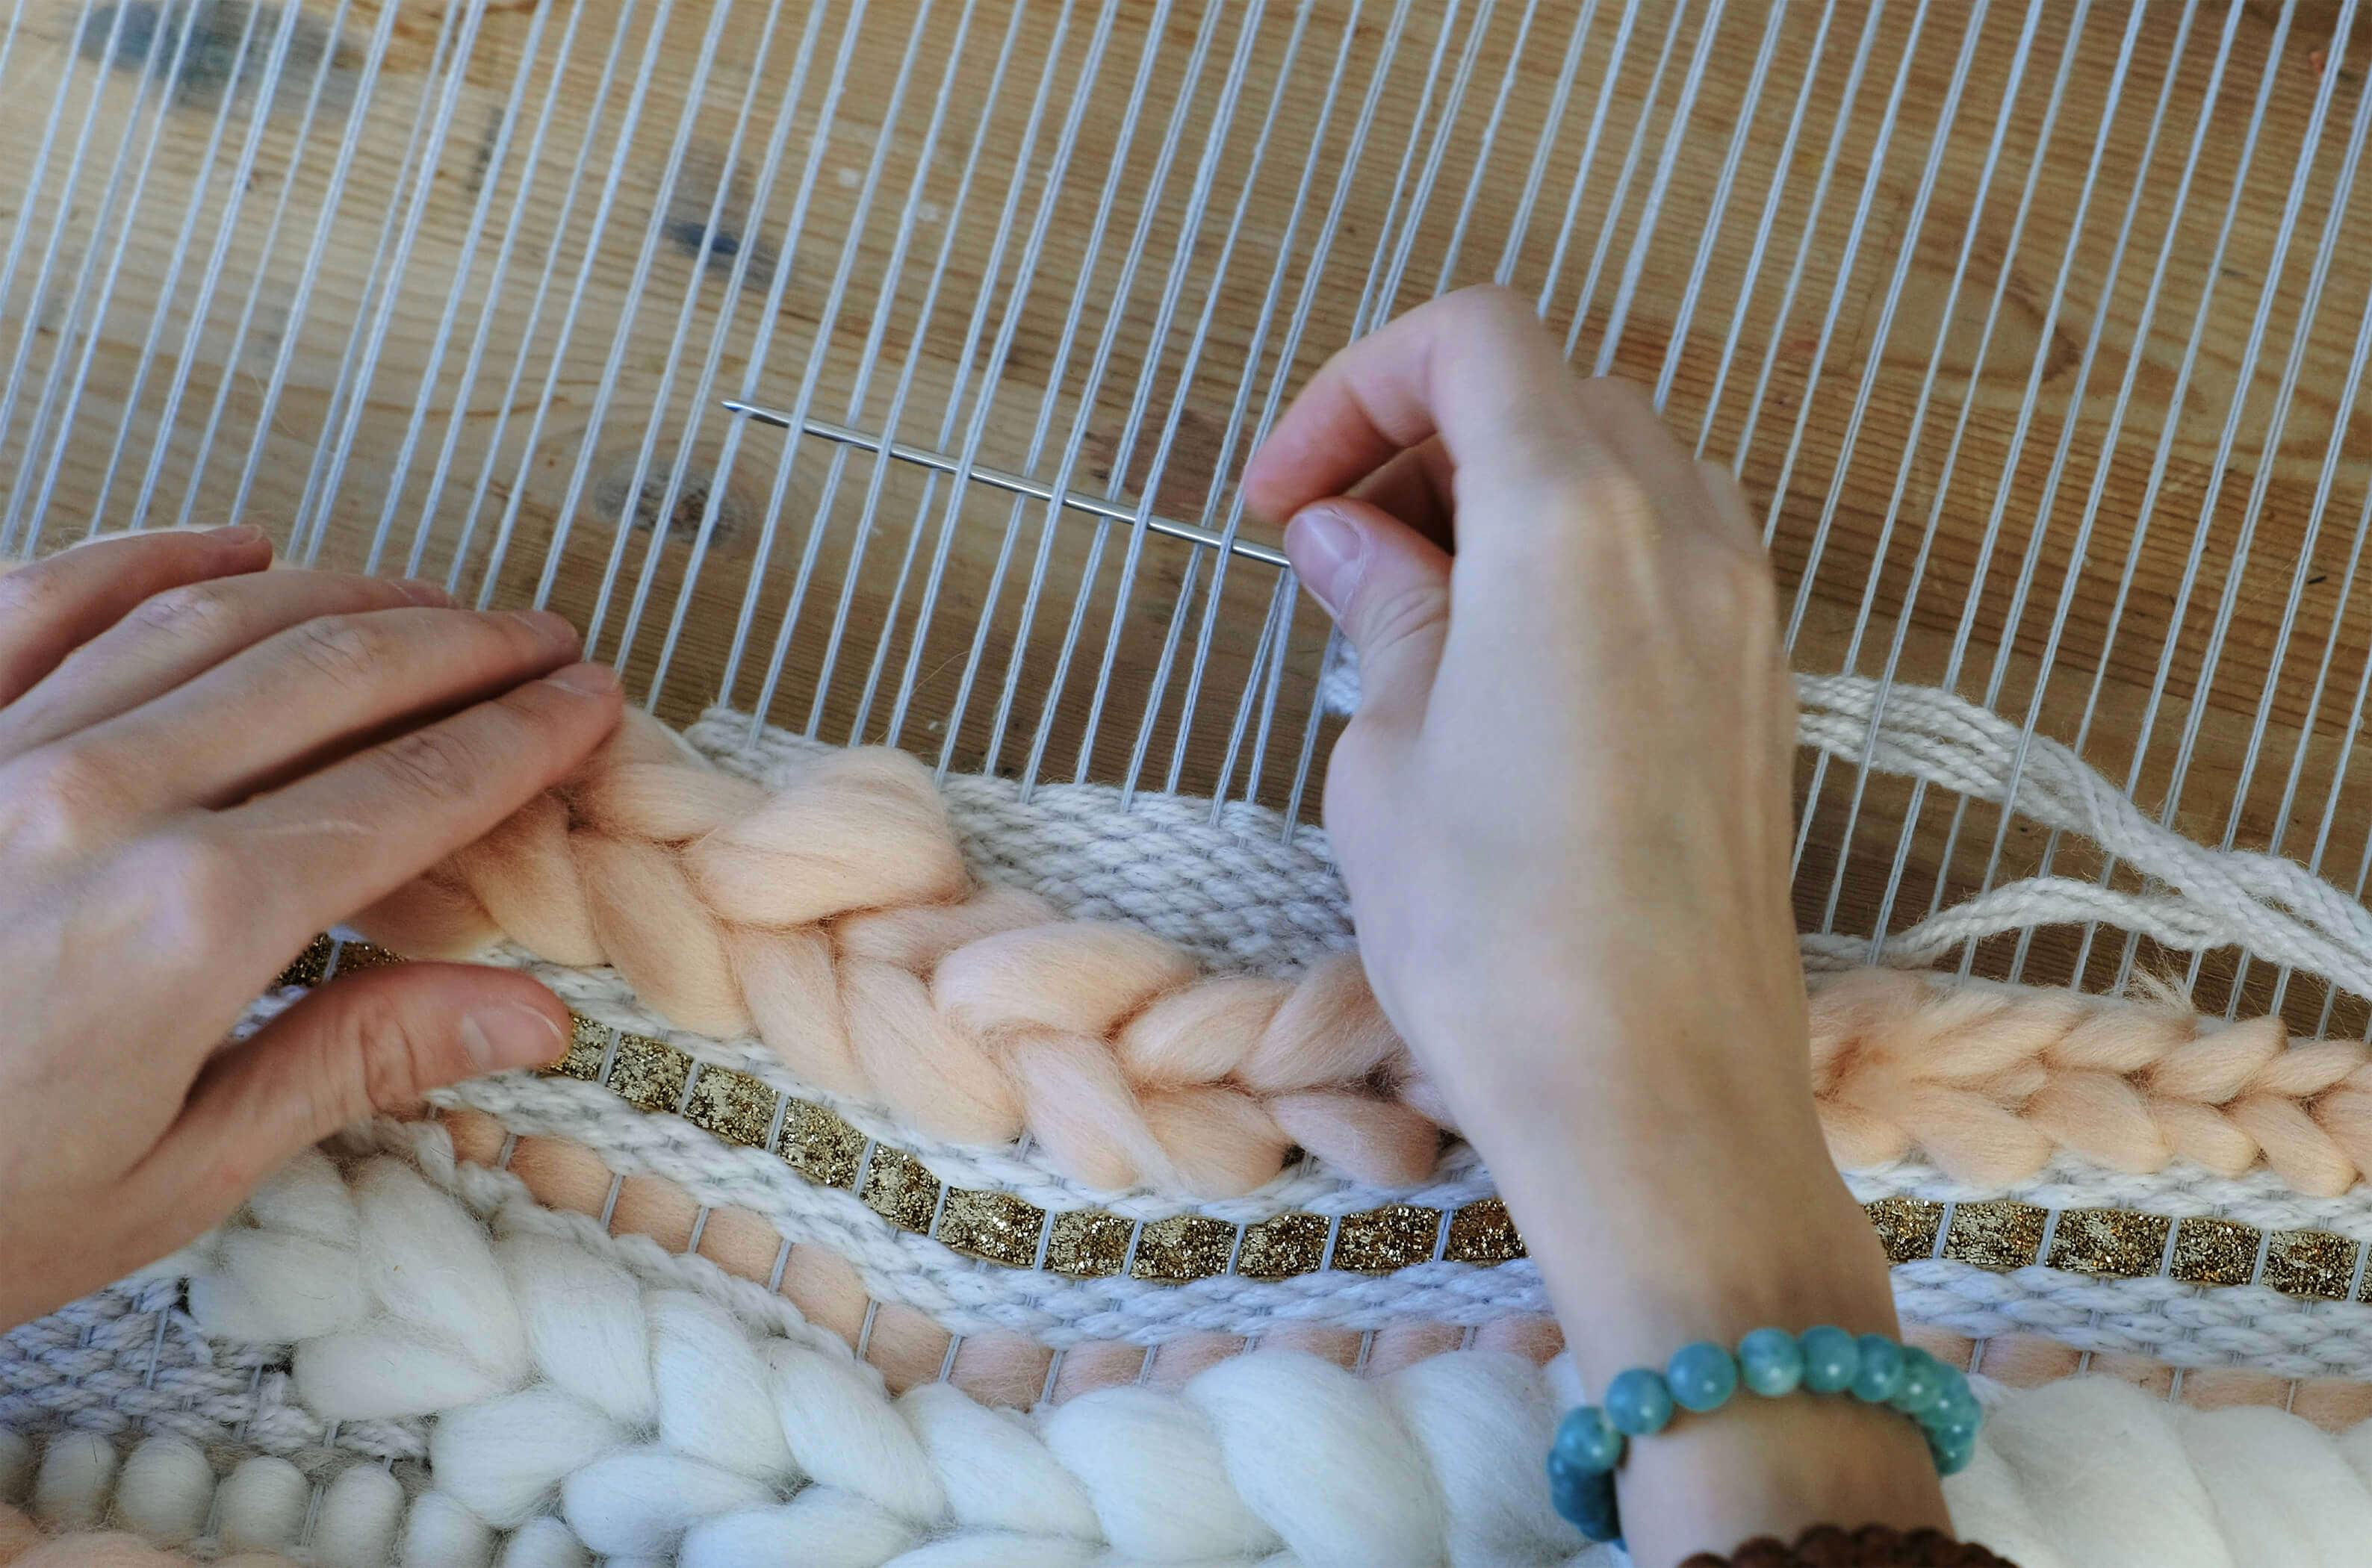 A hand using a loom and yarn needle to weave a yarn piece